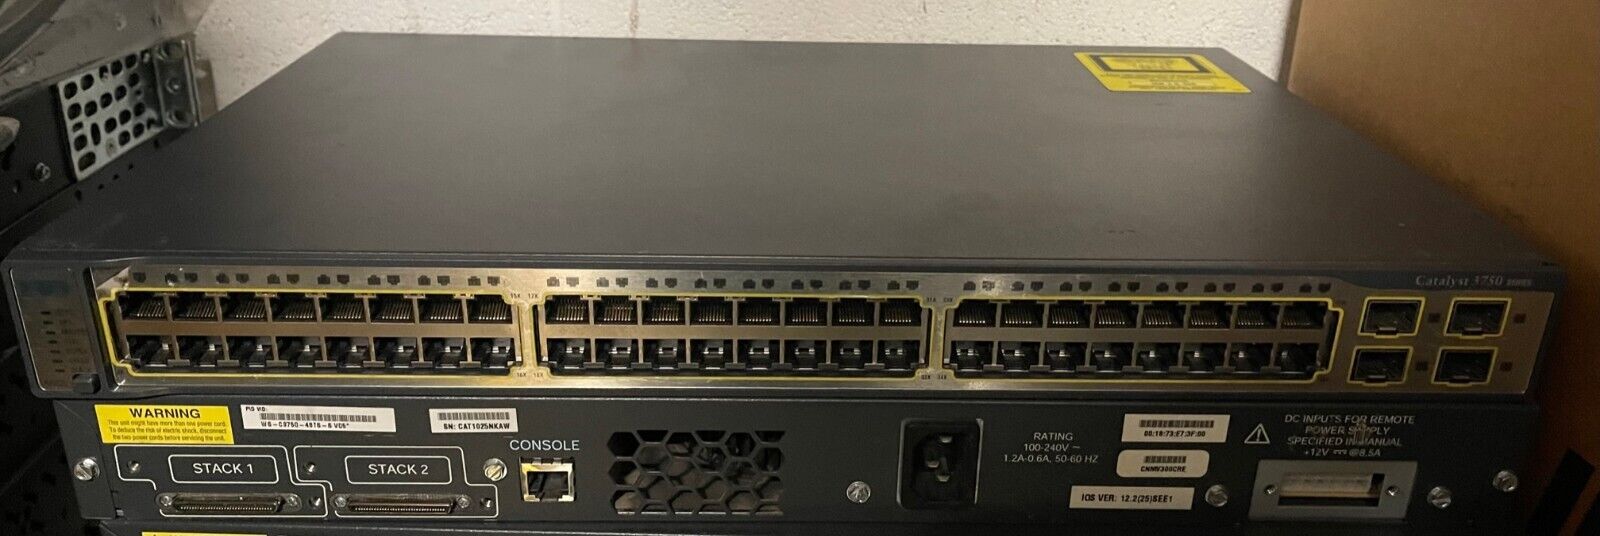 Cisco Catalyst 3750 48-Port WS-C3750-48TS-S more than 55 available